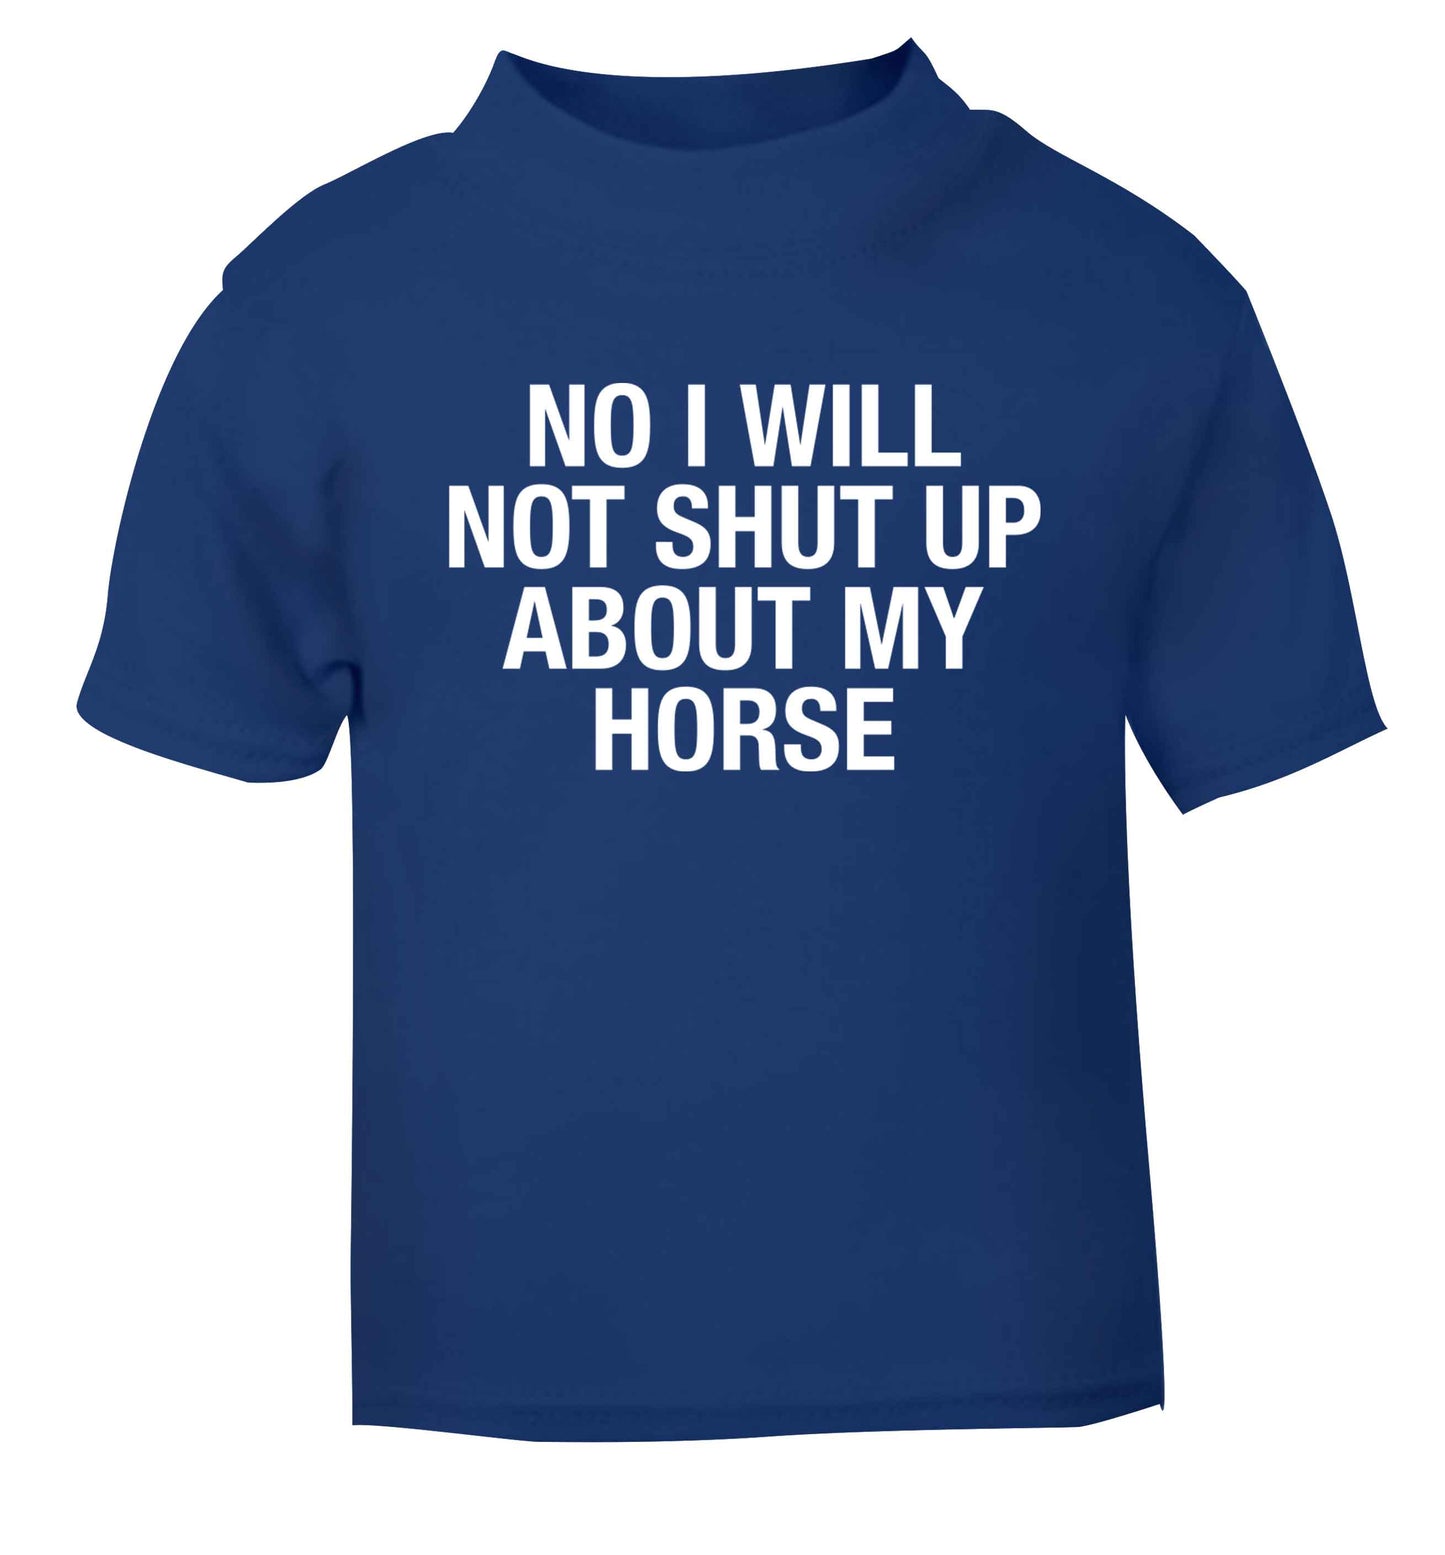 No I will not shut up talking about my horse blue baby toddler Tshirt 2 Years